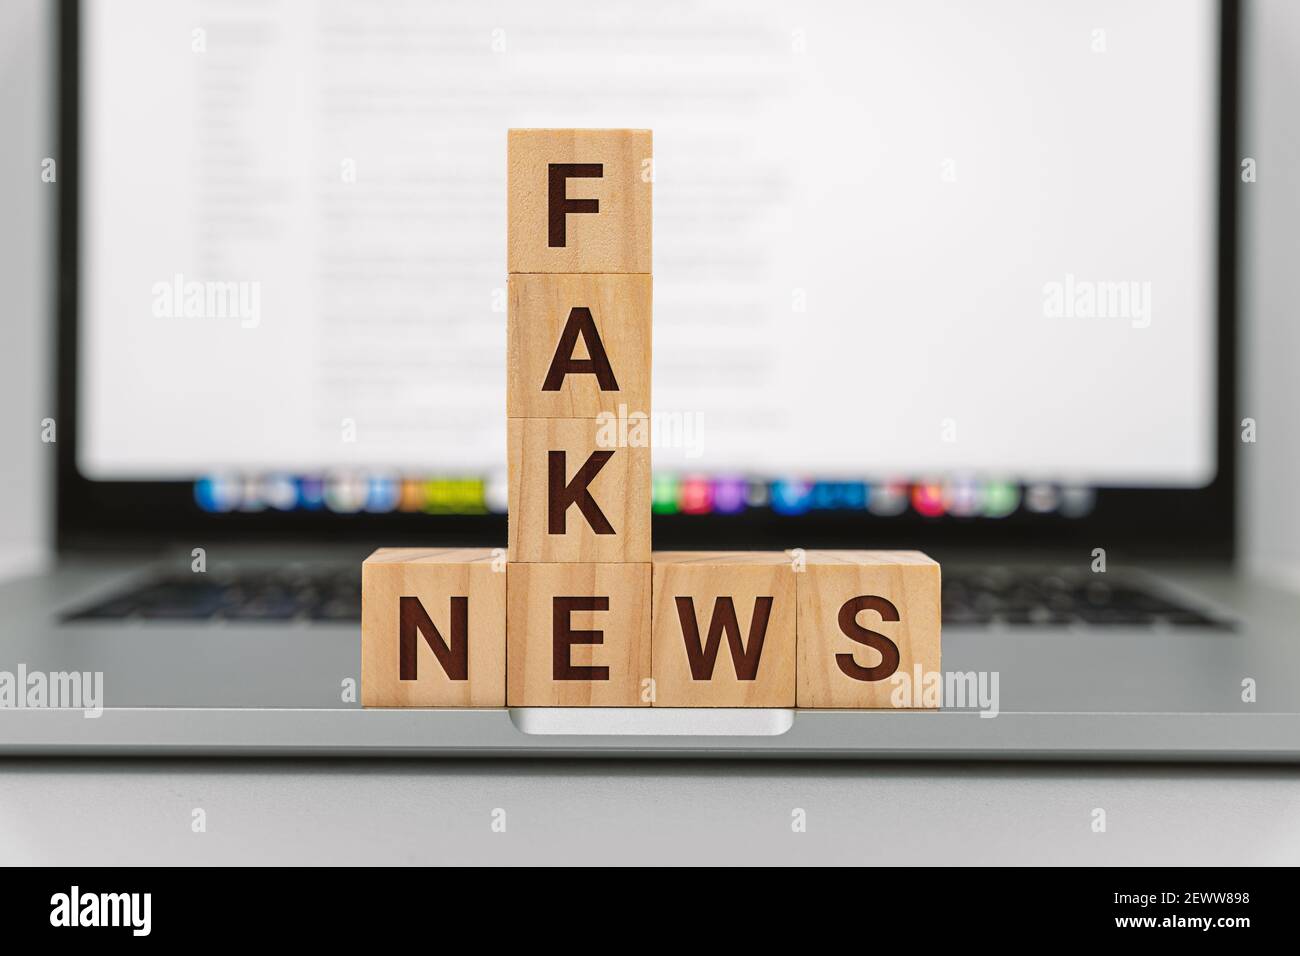 Fake News on Wooden Block Against Laptop Screen Stock Photo